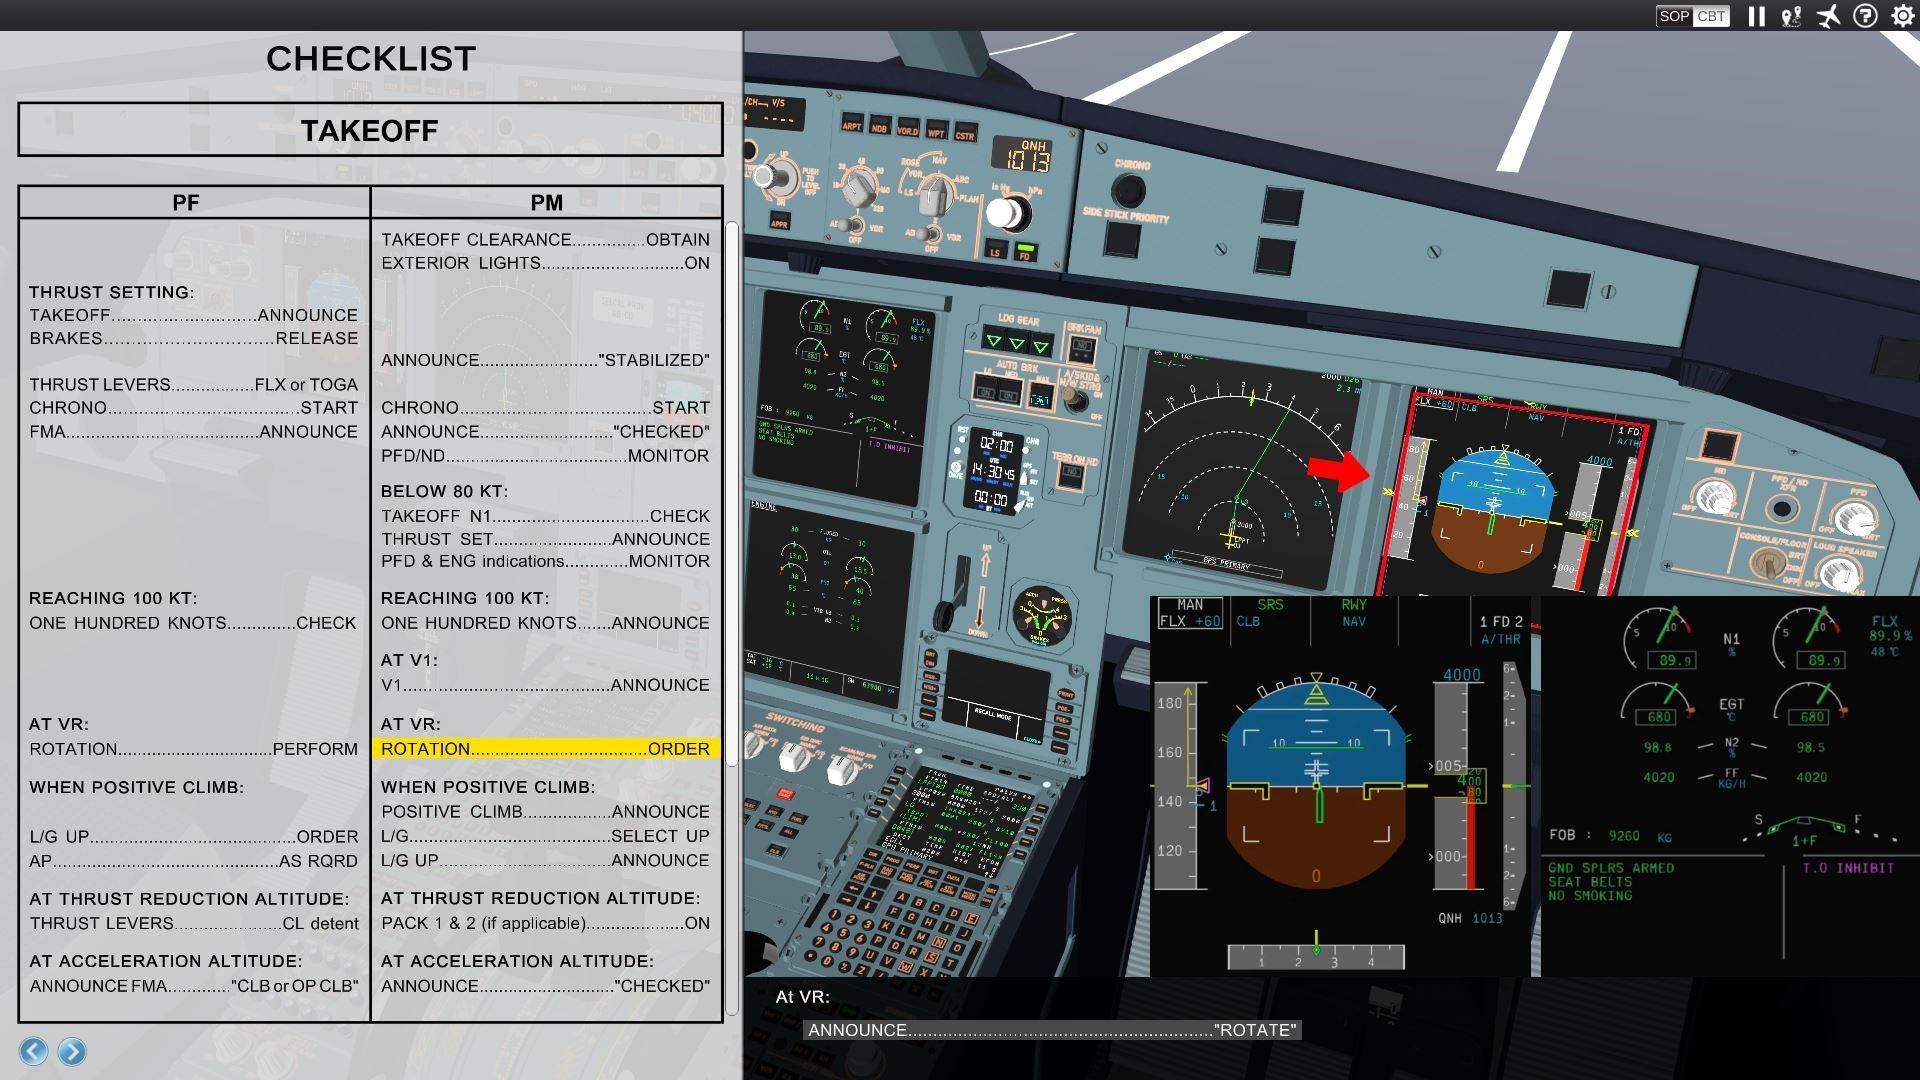 Pilot Monitoring – TAKEOFF checklist. When PFD indicates V1 speed, PM announces “rotate”.